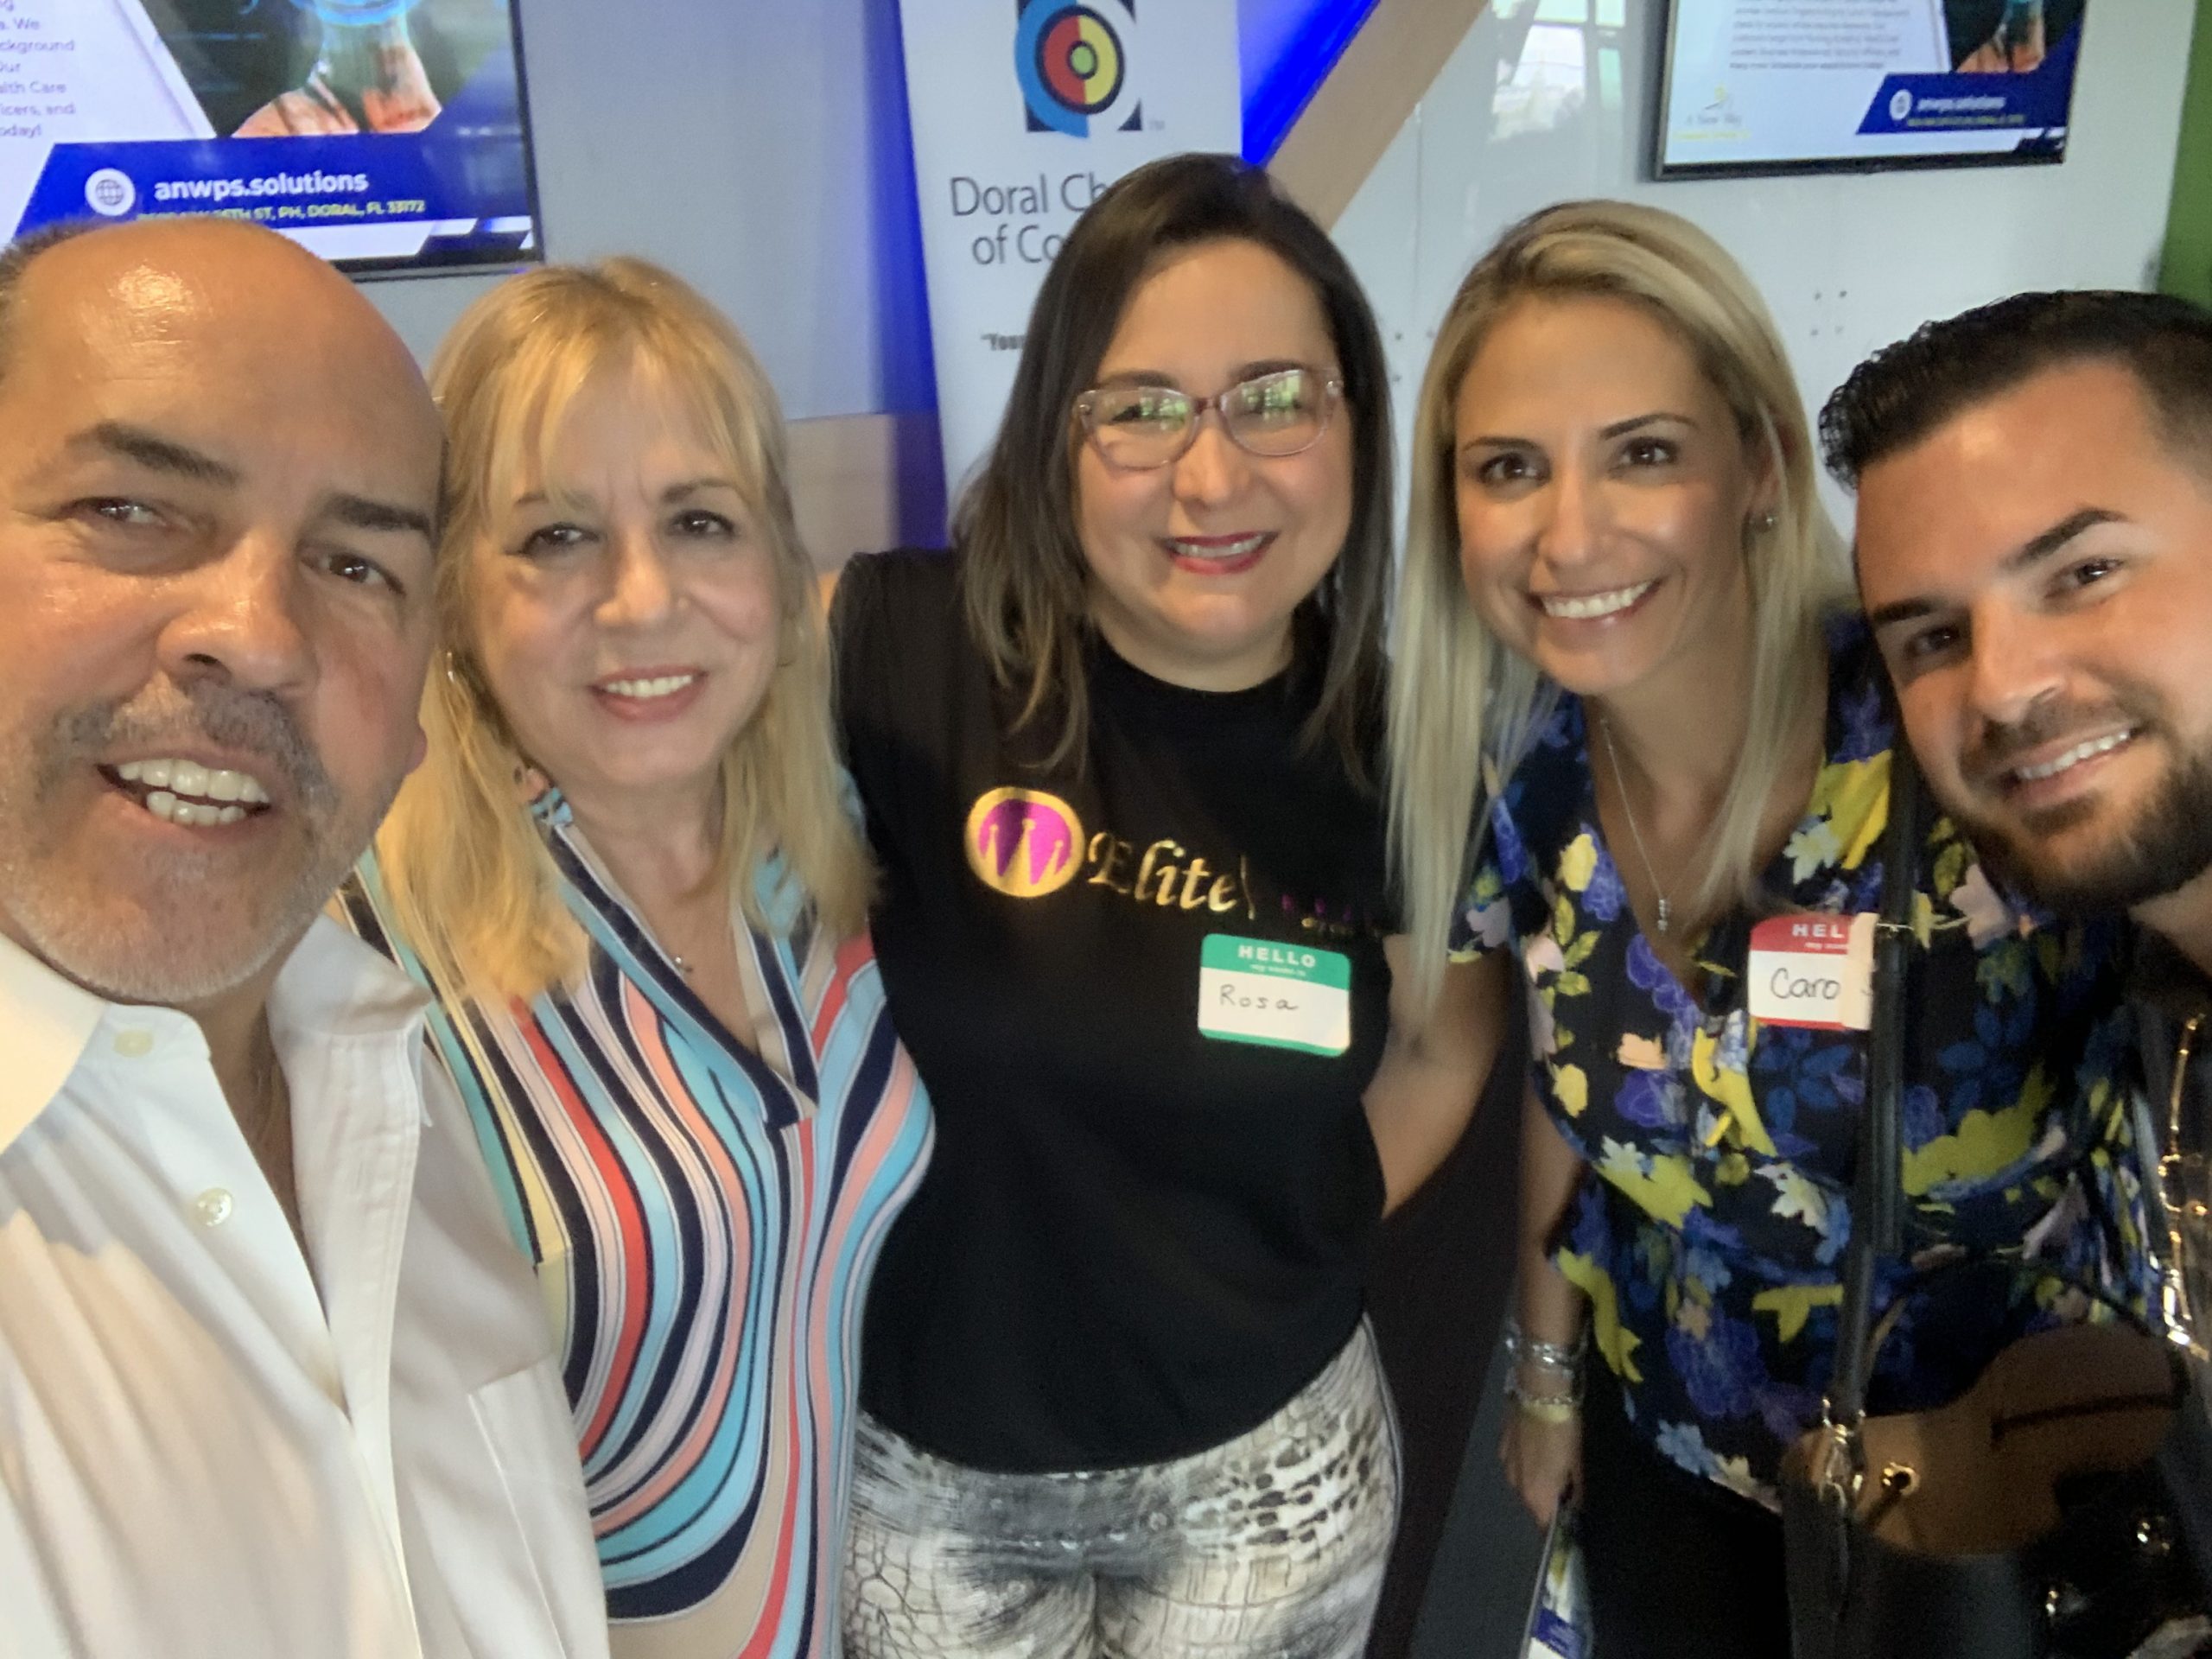 Topgolf Doral Chamber of Commerce Networking Luncheon!